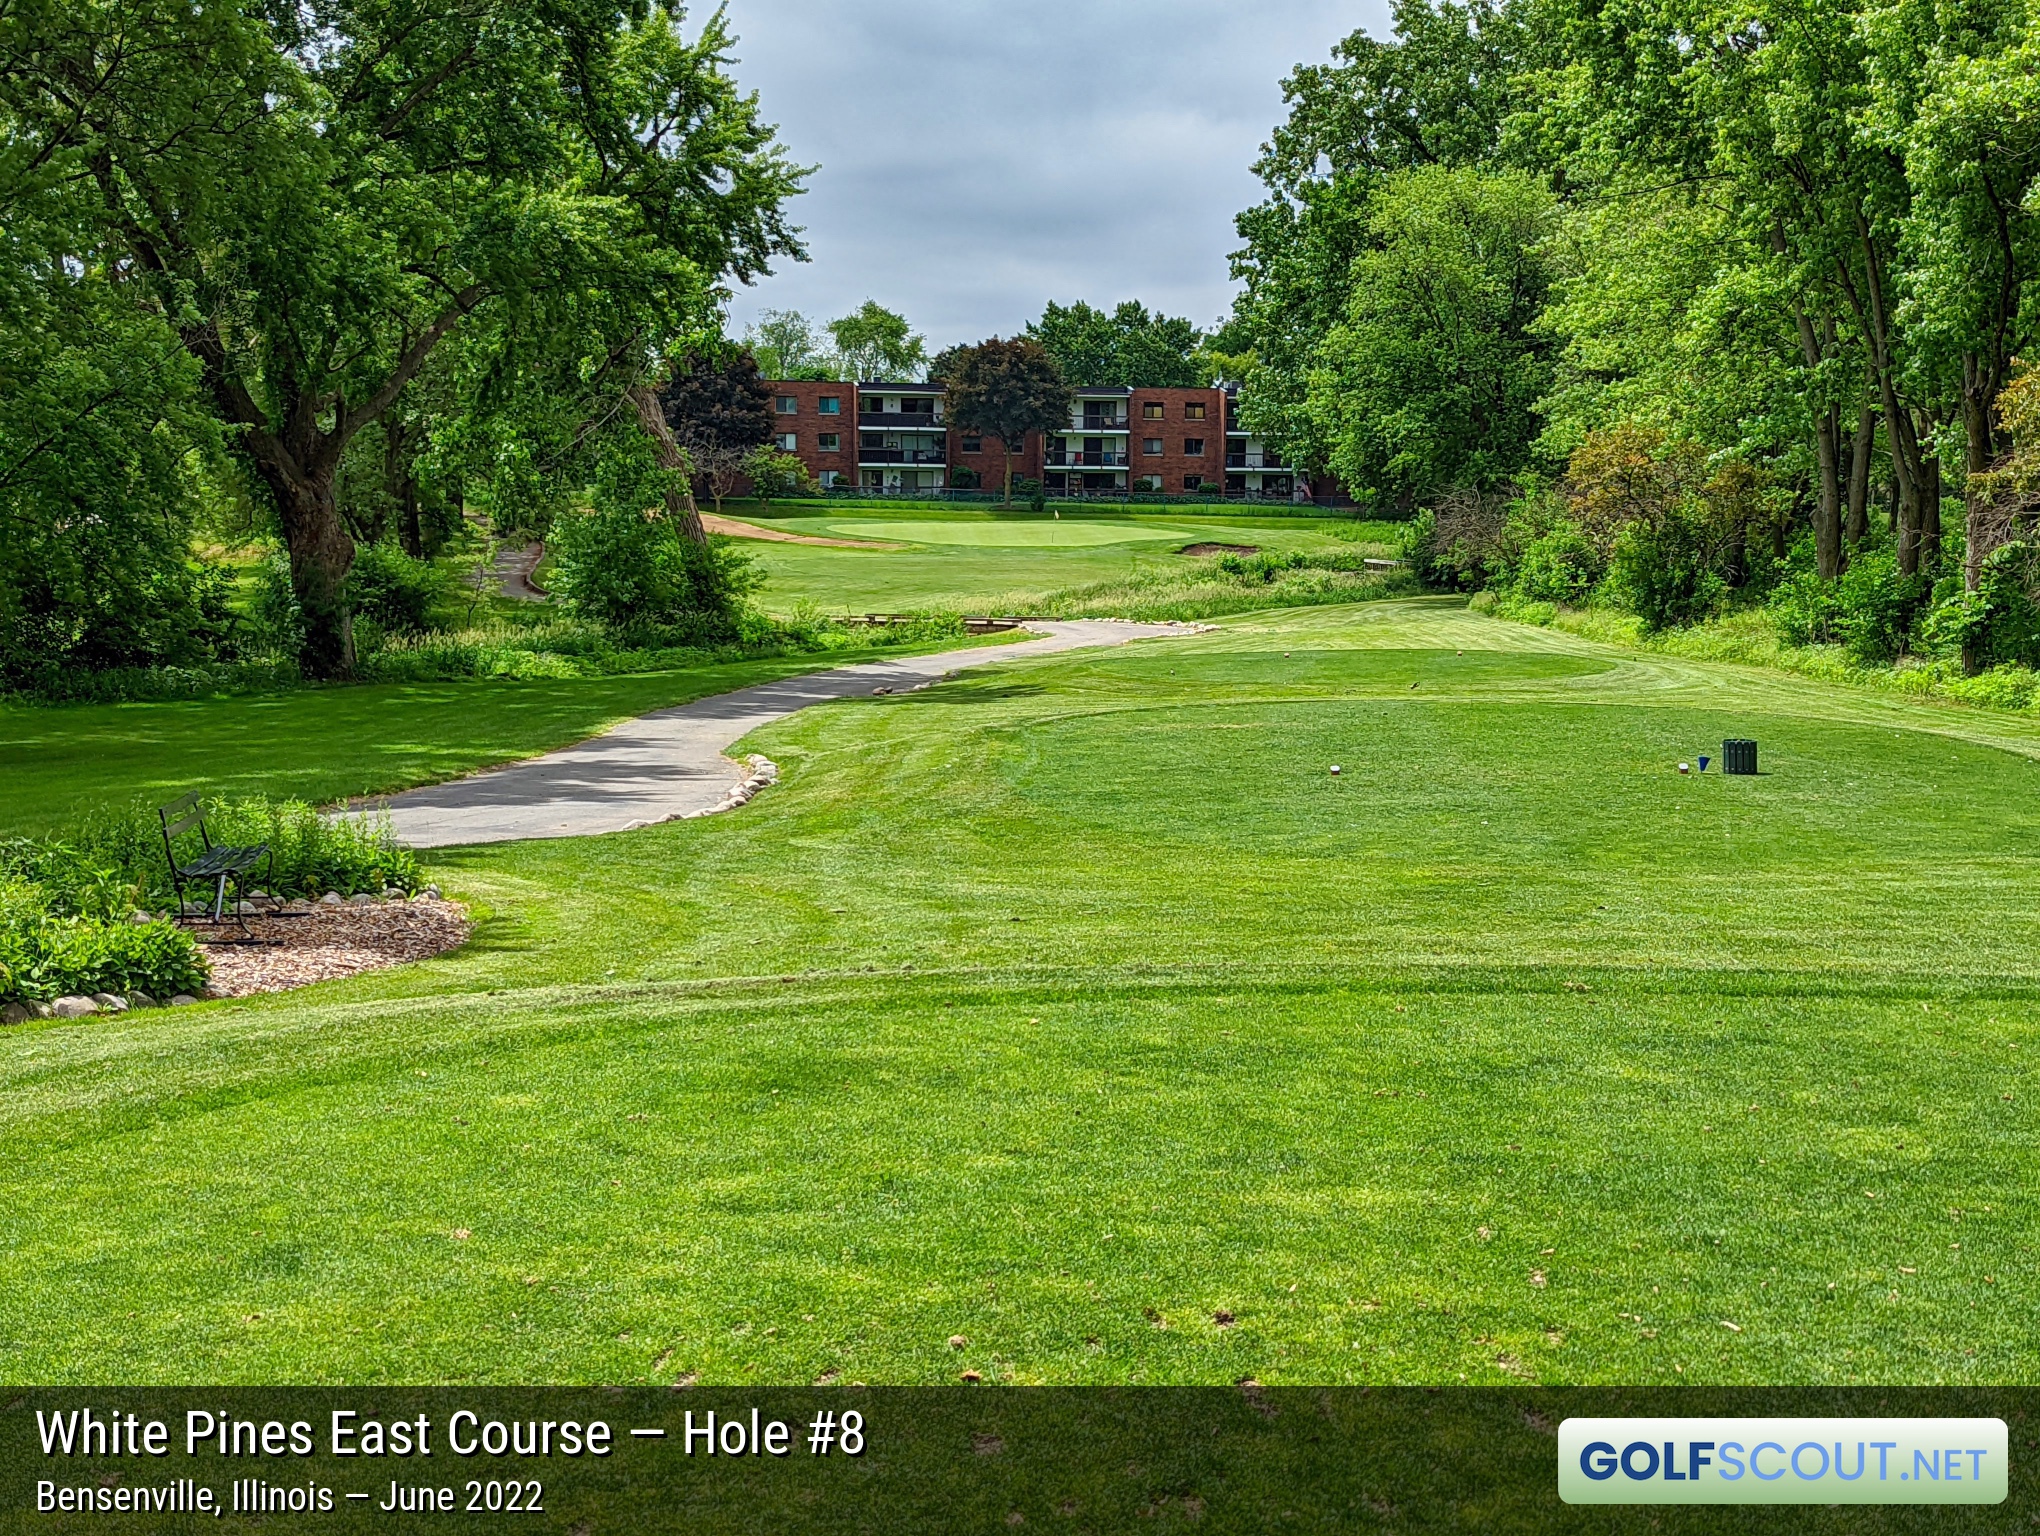 Photo of hole #8 at White Pines East Course in Bensenville, Illinois. 